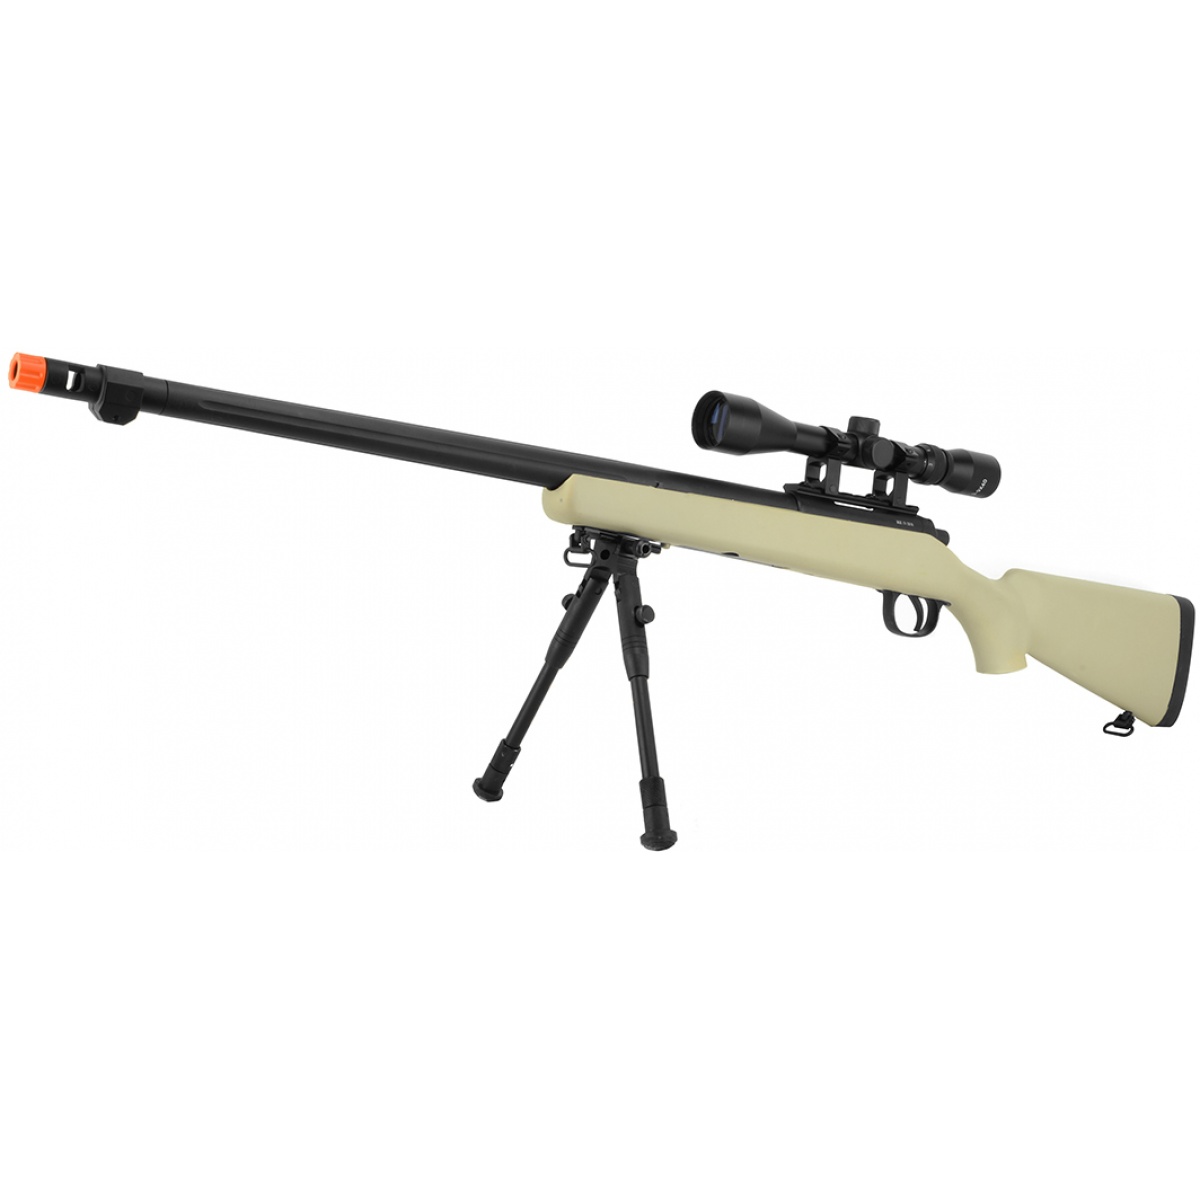 Well Black Vsr-10 Sniper Bolt Action Airsoft Rifle 9x Magnification Scope 500fps for sale online 